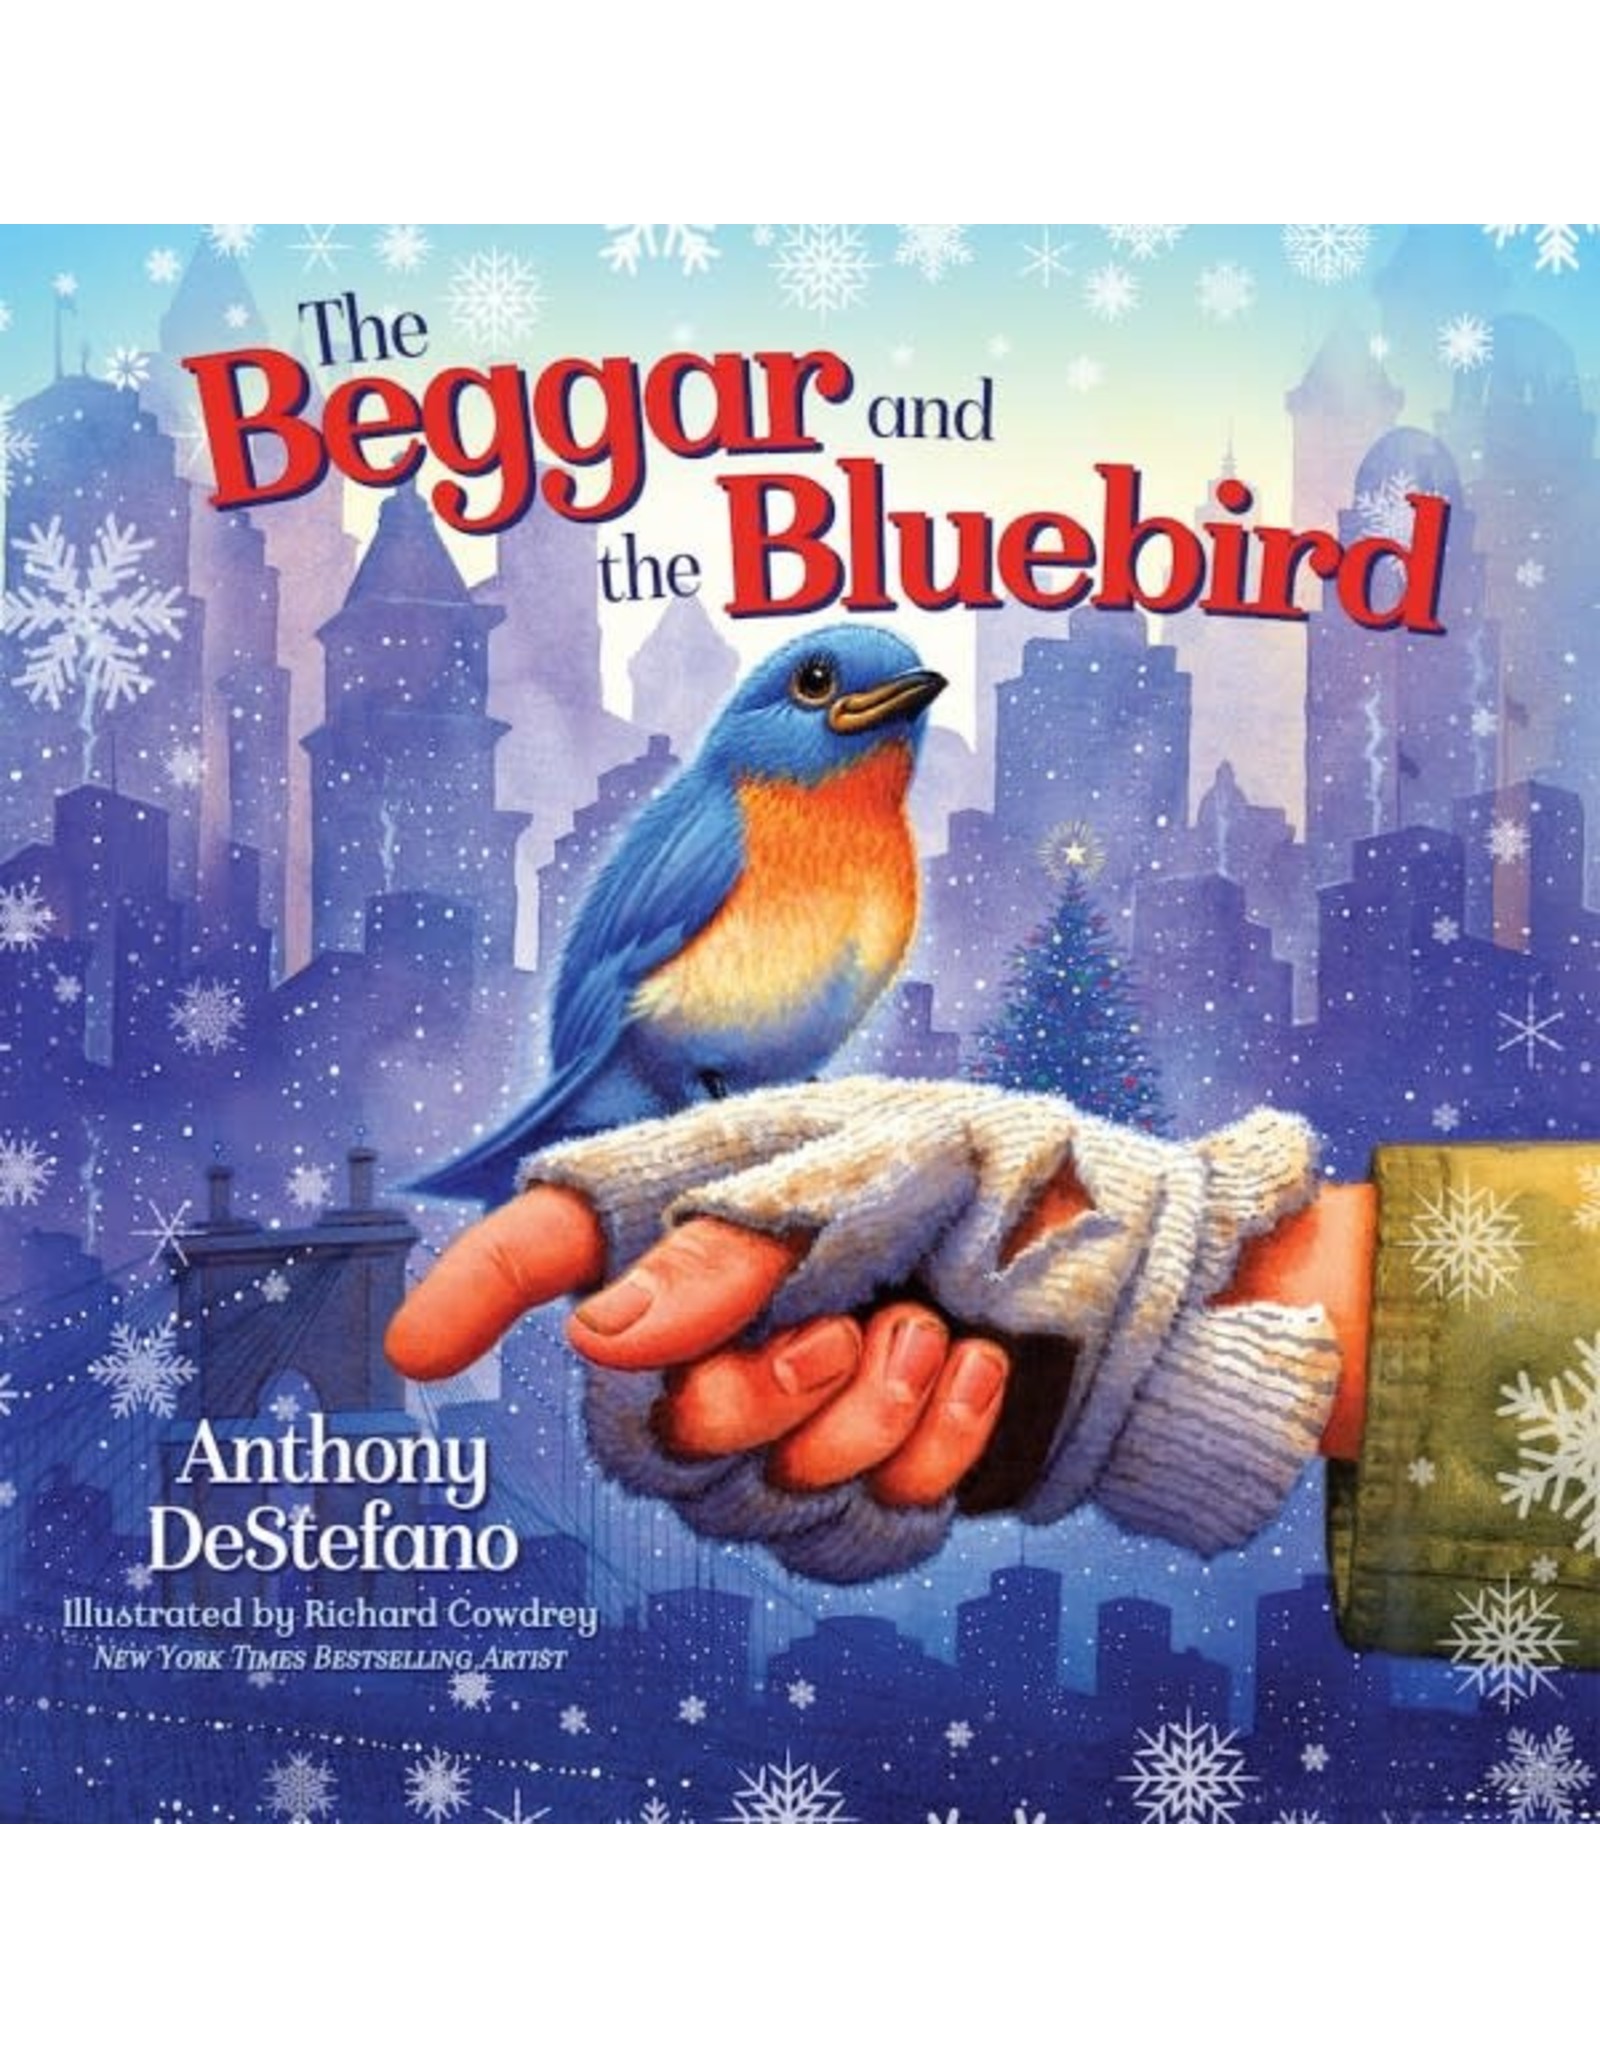 Sophia Press The Beggar and the Bluebird by Anthony DeStefano